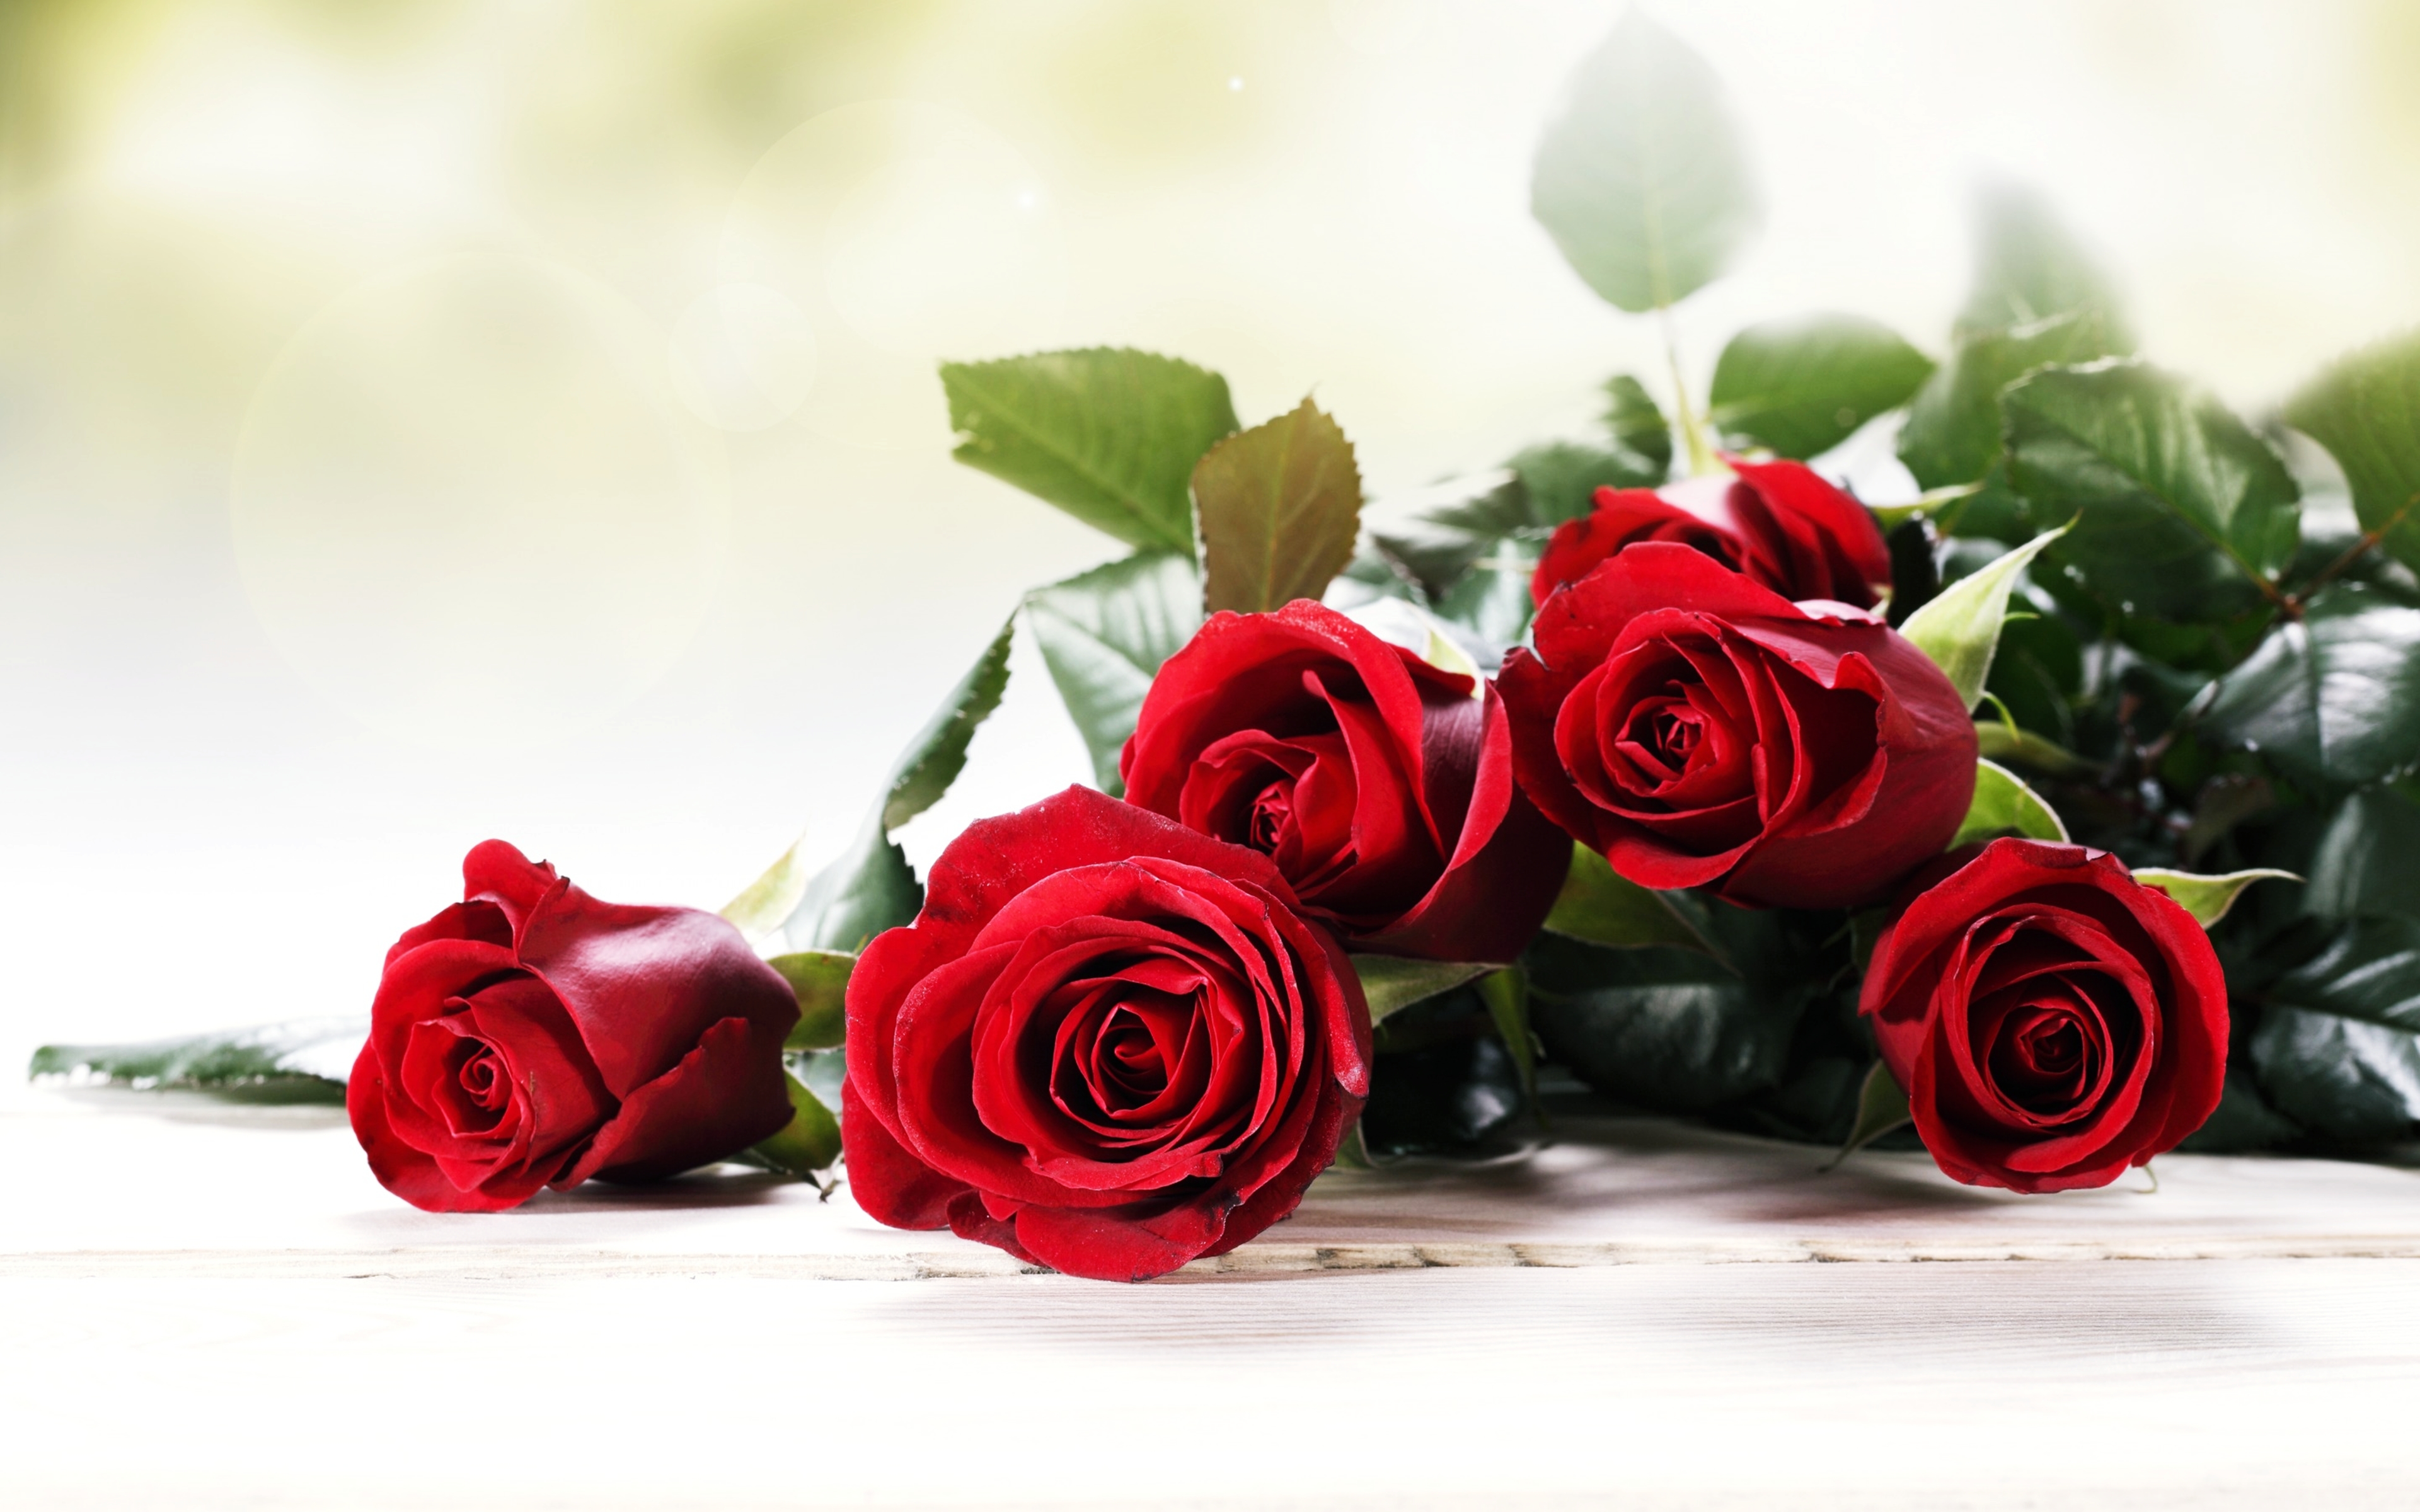 rose, bouquet, red rose, earth, flower, love, red flower, flowers